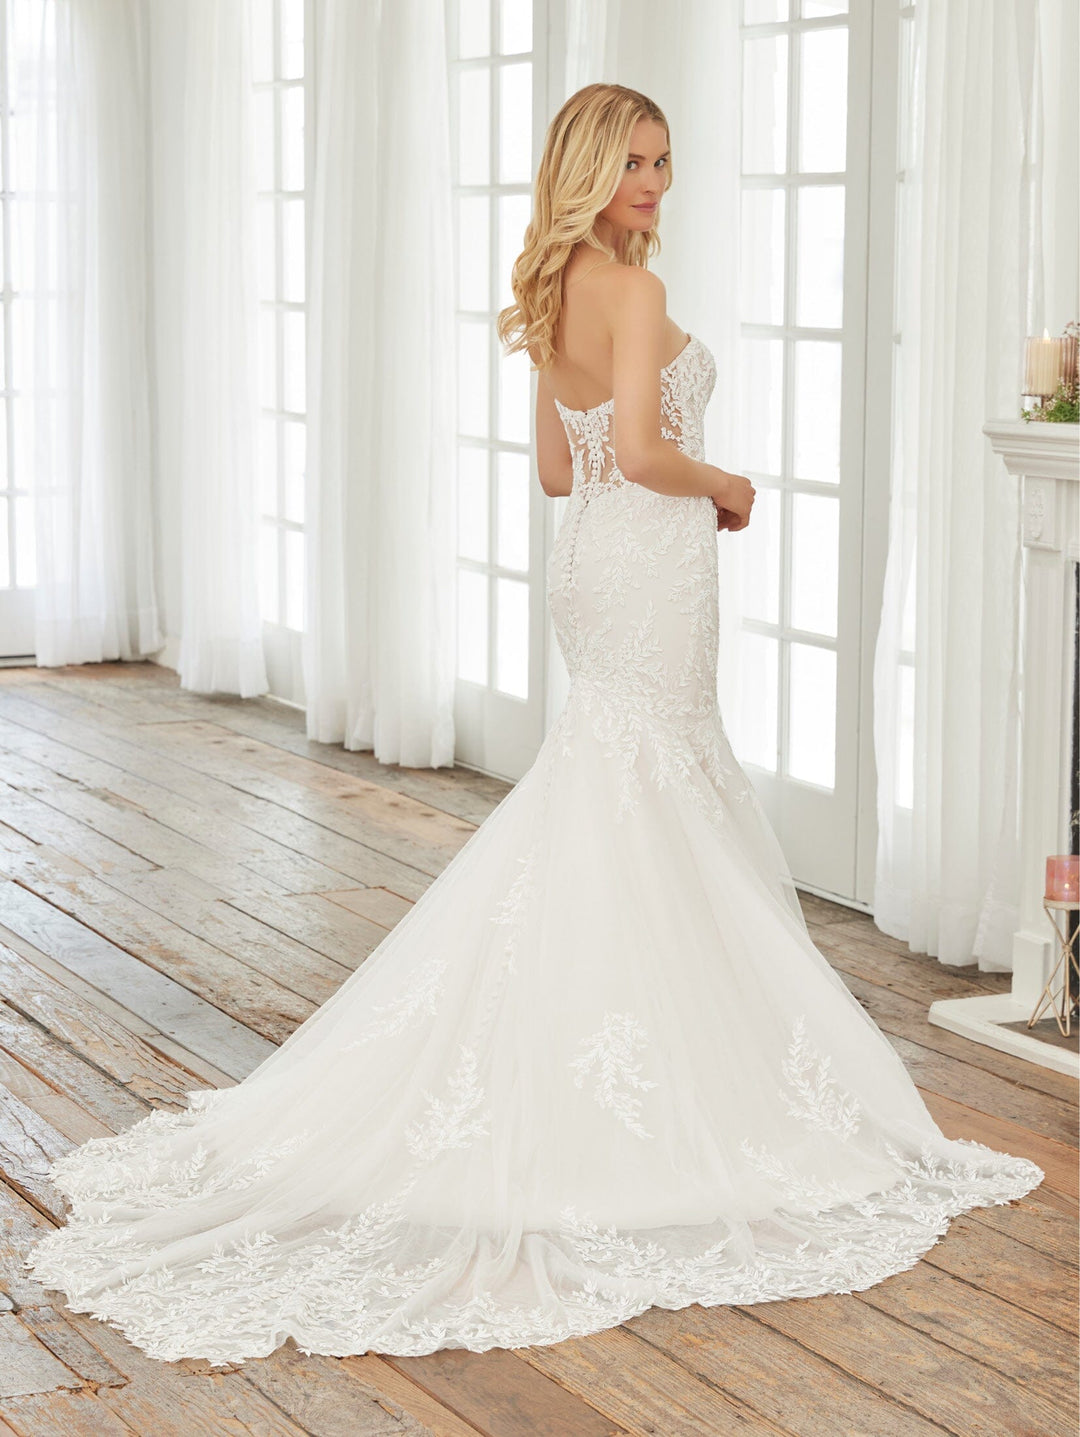 Strapless Bell Sleeve Bridal Gown by Adrianna Papell 31243